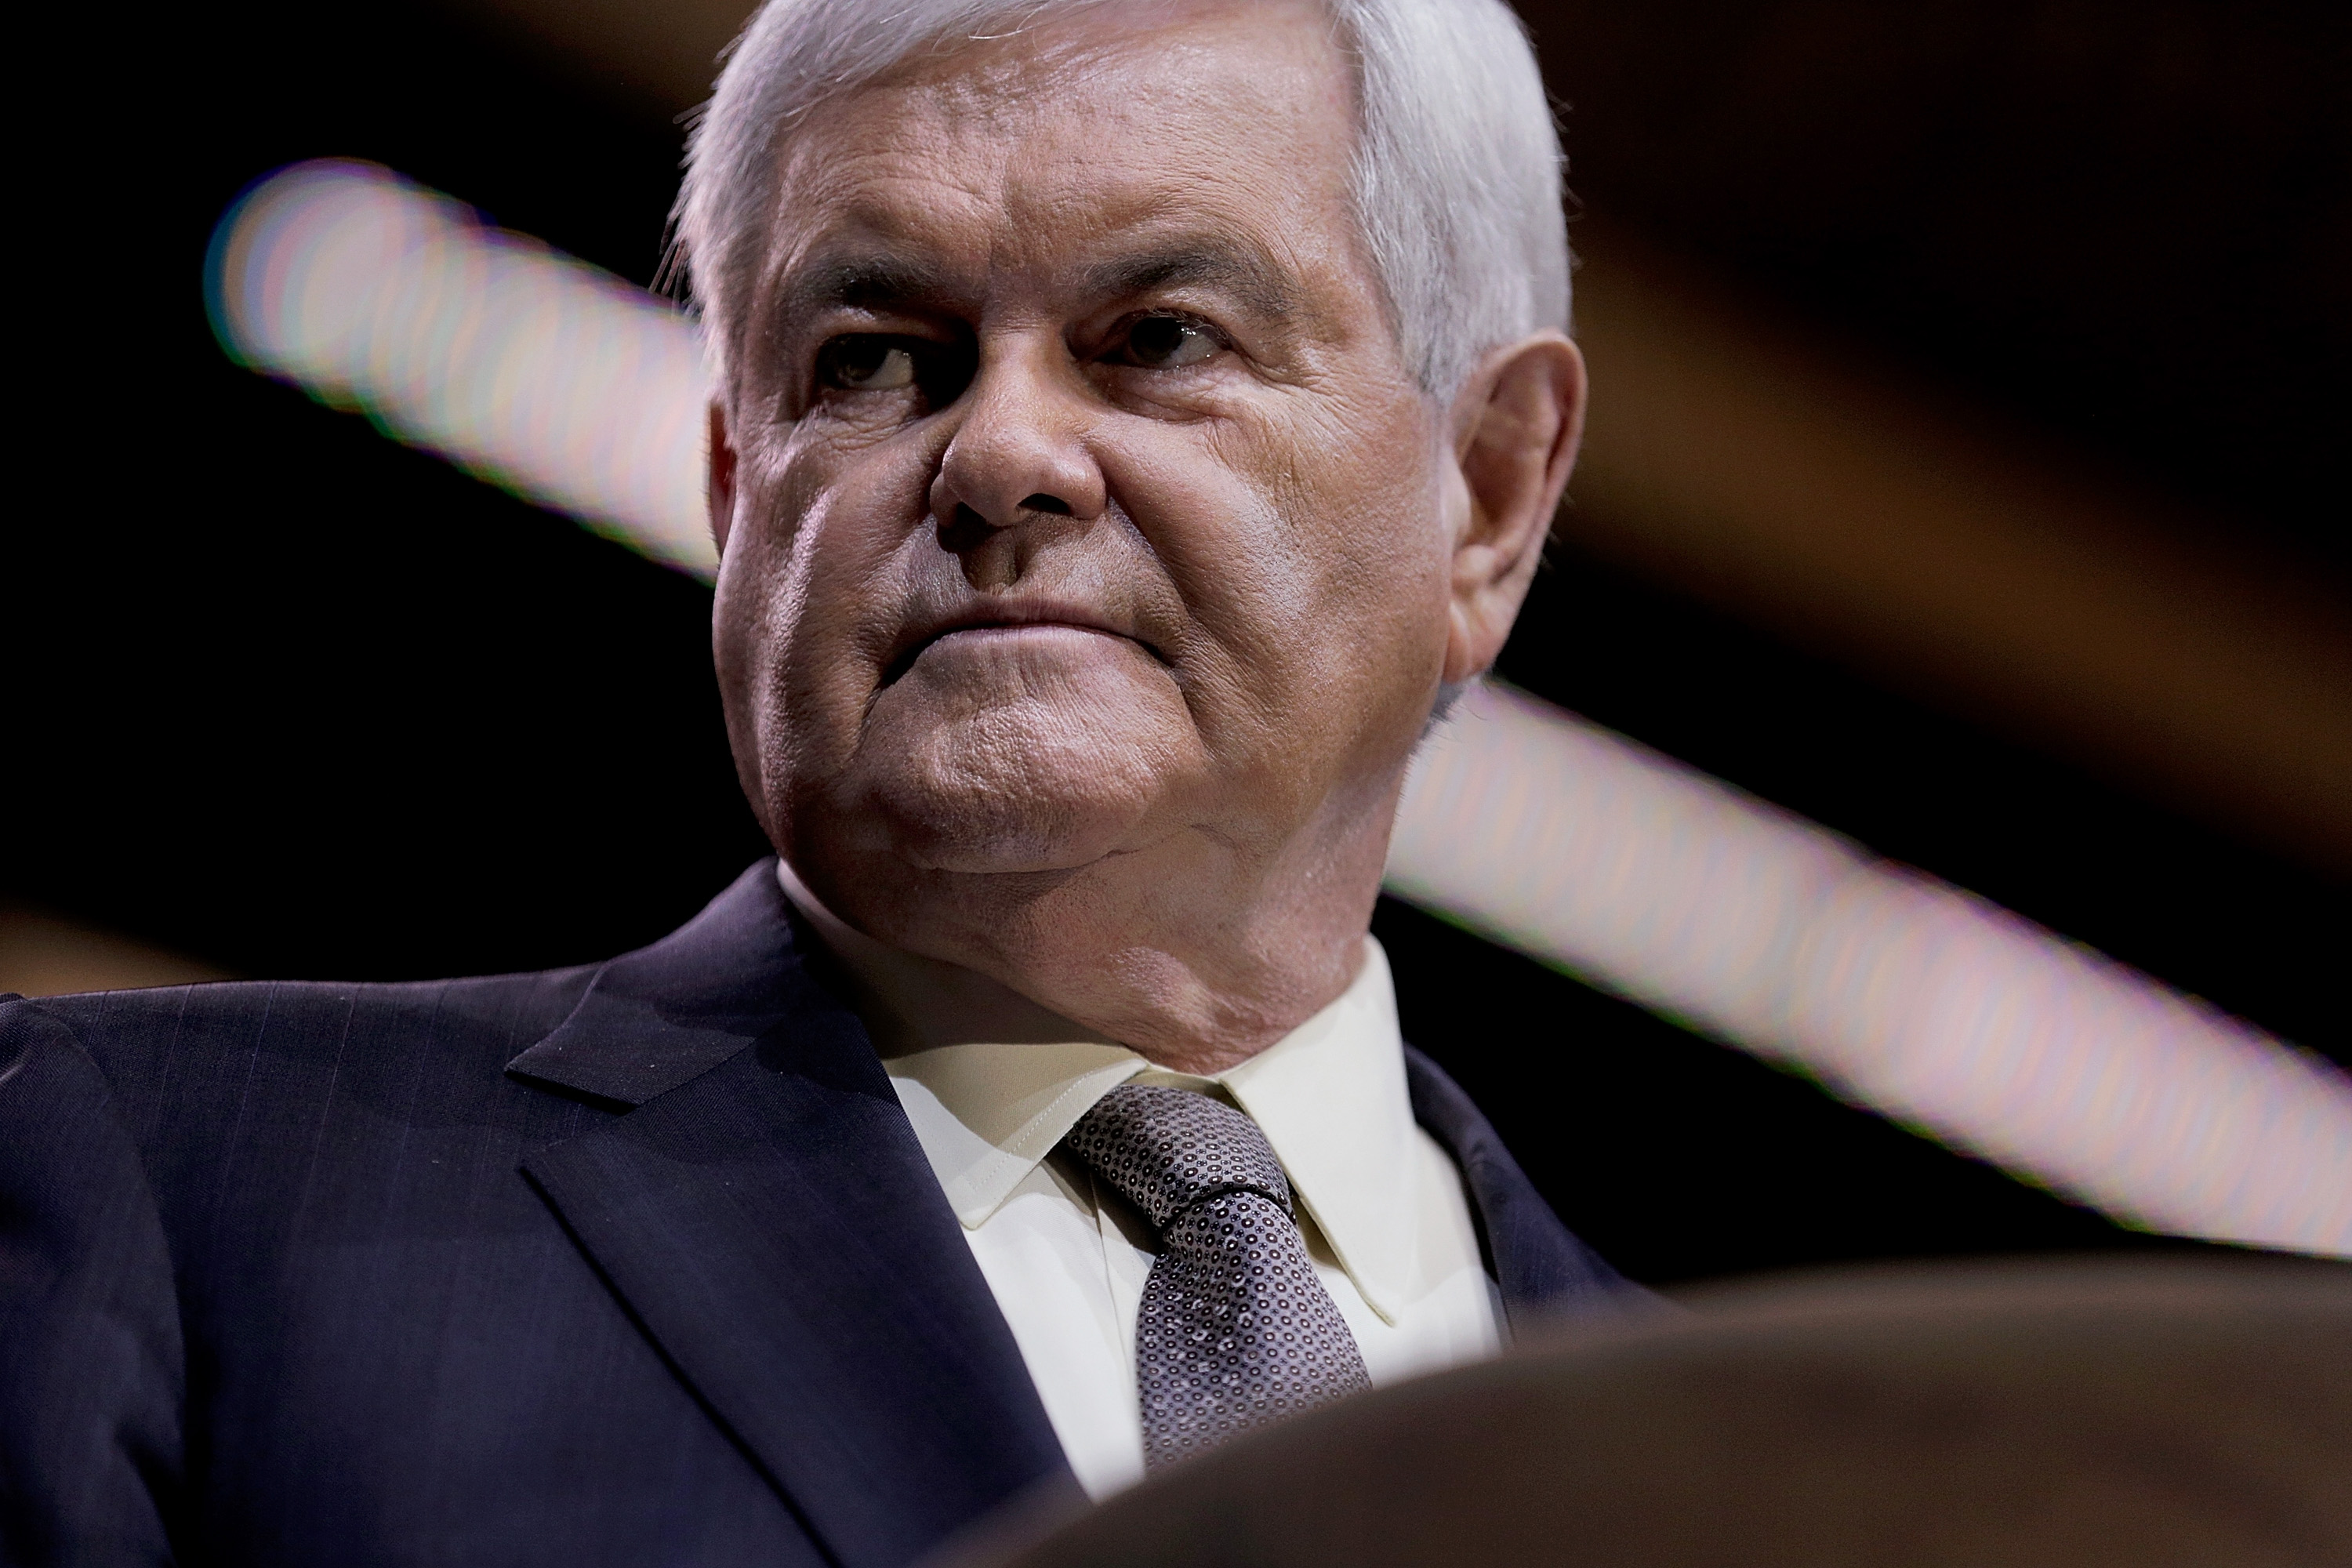 Newt Gingrich, former speaker of the U.S. House of Representatives, speaks during the 41st annual Conservative Political Action Conference at the Gaylord International Hotel and Conference Center in National Harbor, Md., on March 8, 2014. (T.J. Kirkpatrick—Getty Images)